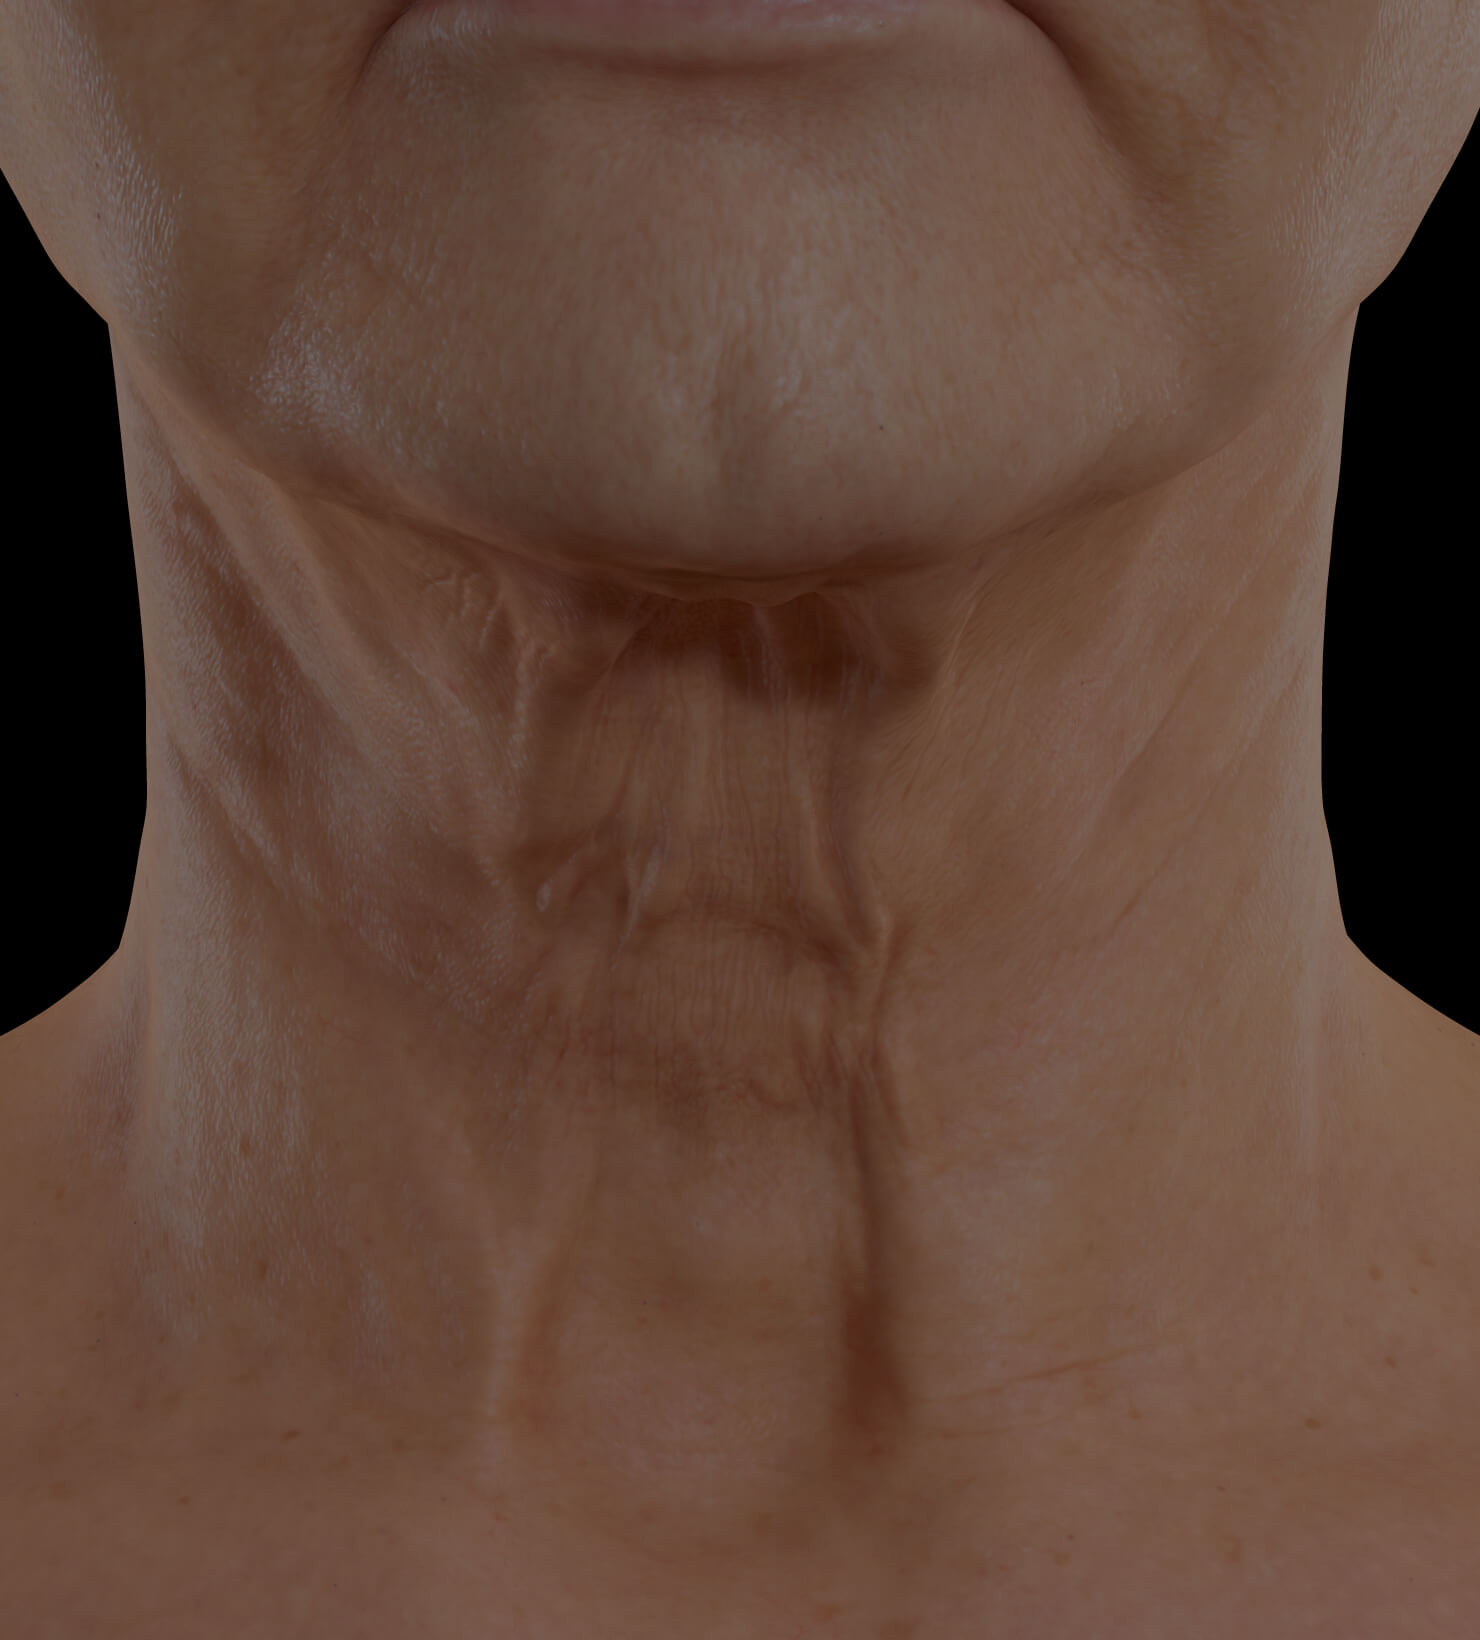 Clinique Chloé female patient with neck skin laxity treated with Sculpra injections for neck skin tightening